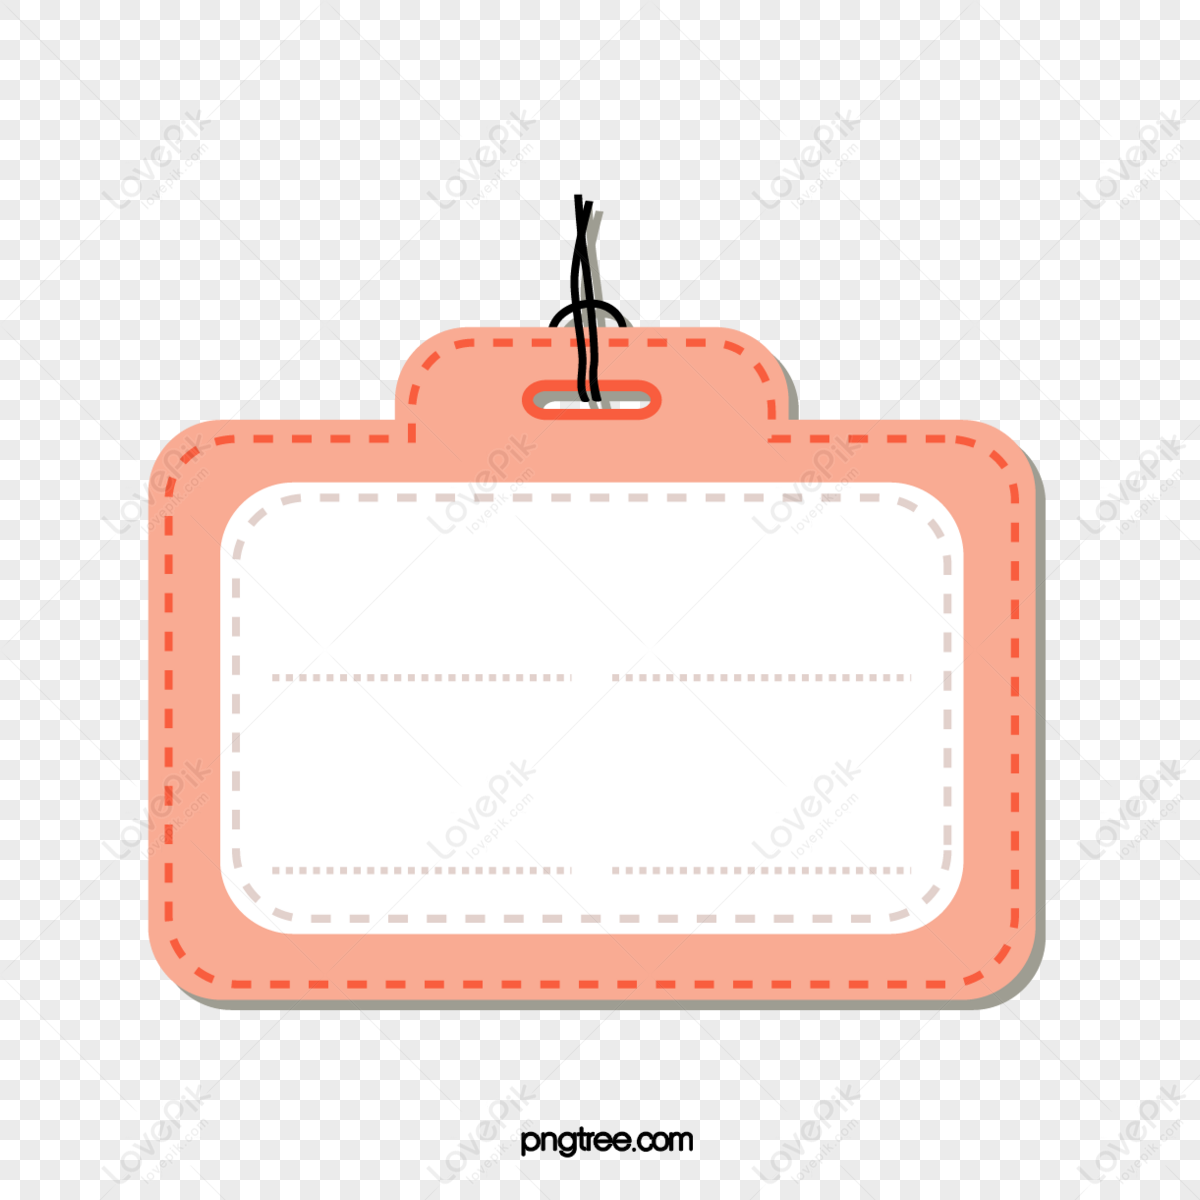 Orange Stereo Cortical Aircraft Luggage Card,stereoscopic,cortex png picture